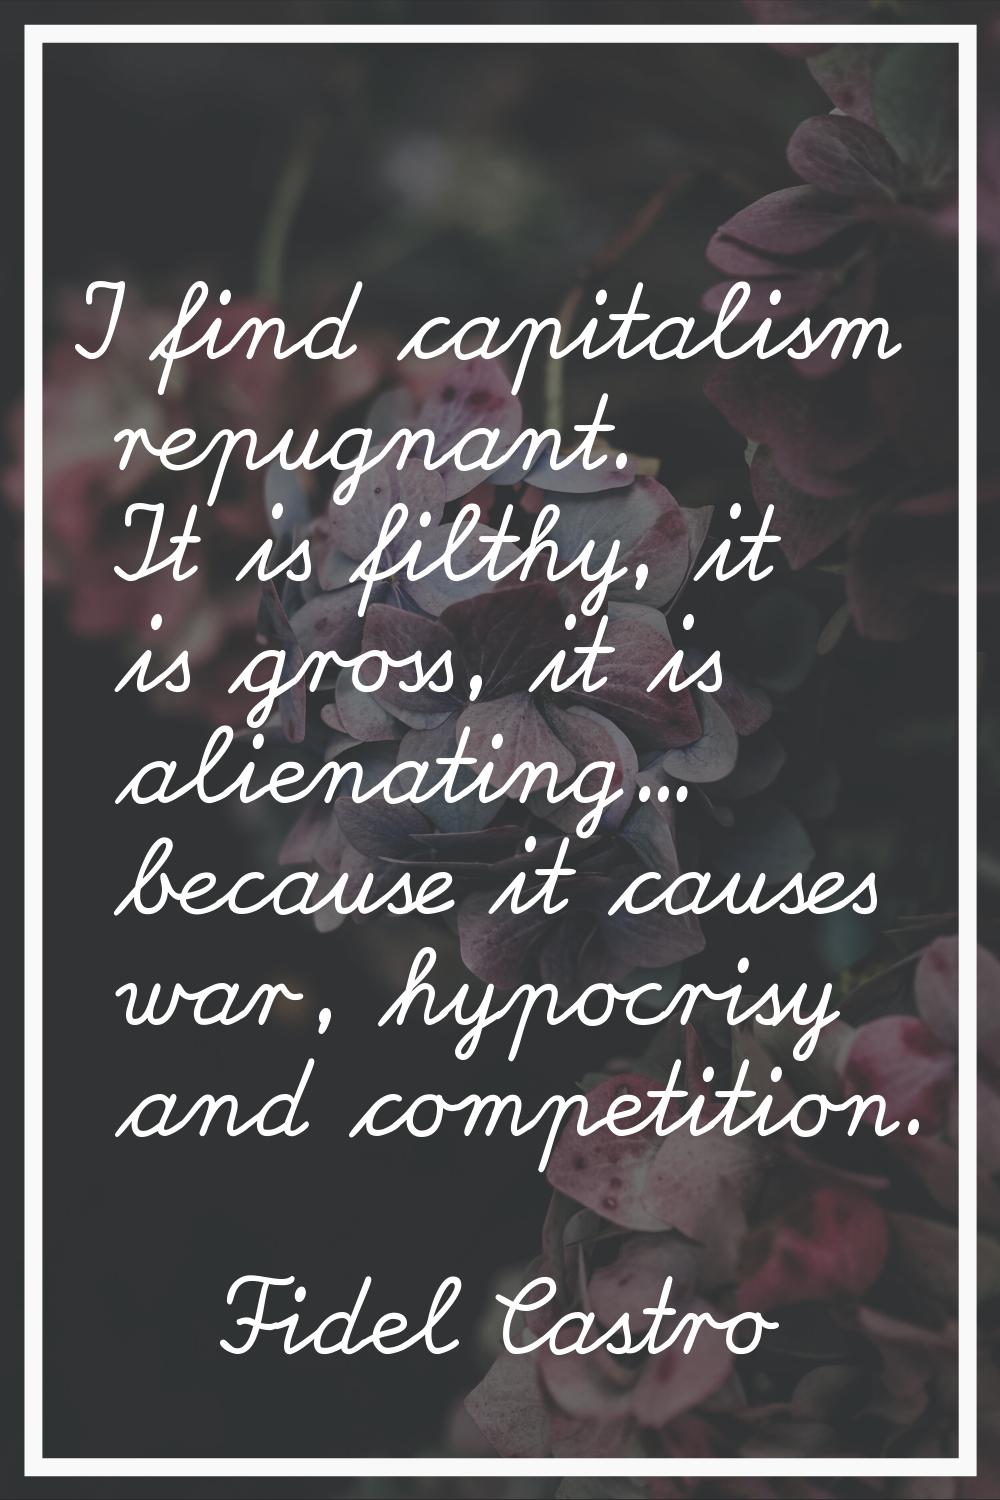 I find capitalism repugnant. It is filthy, it is gross, it is alienating... because it causes war, 